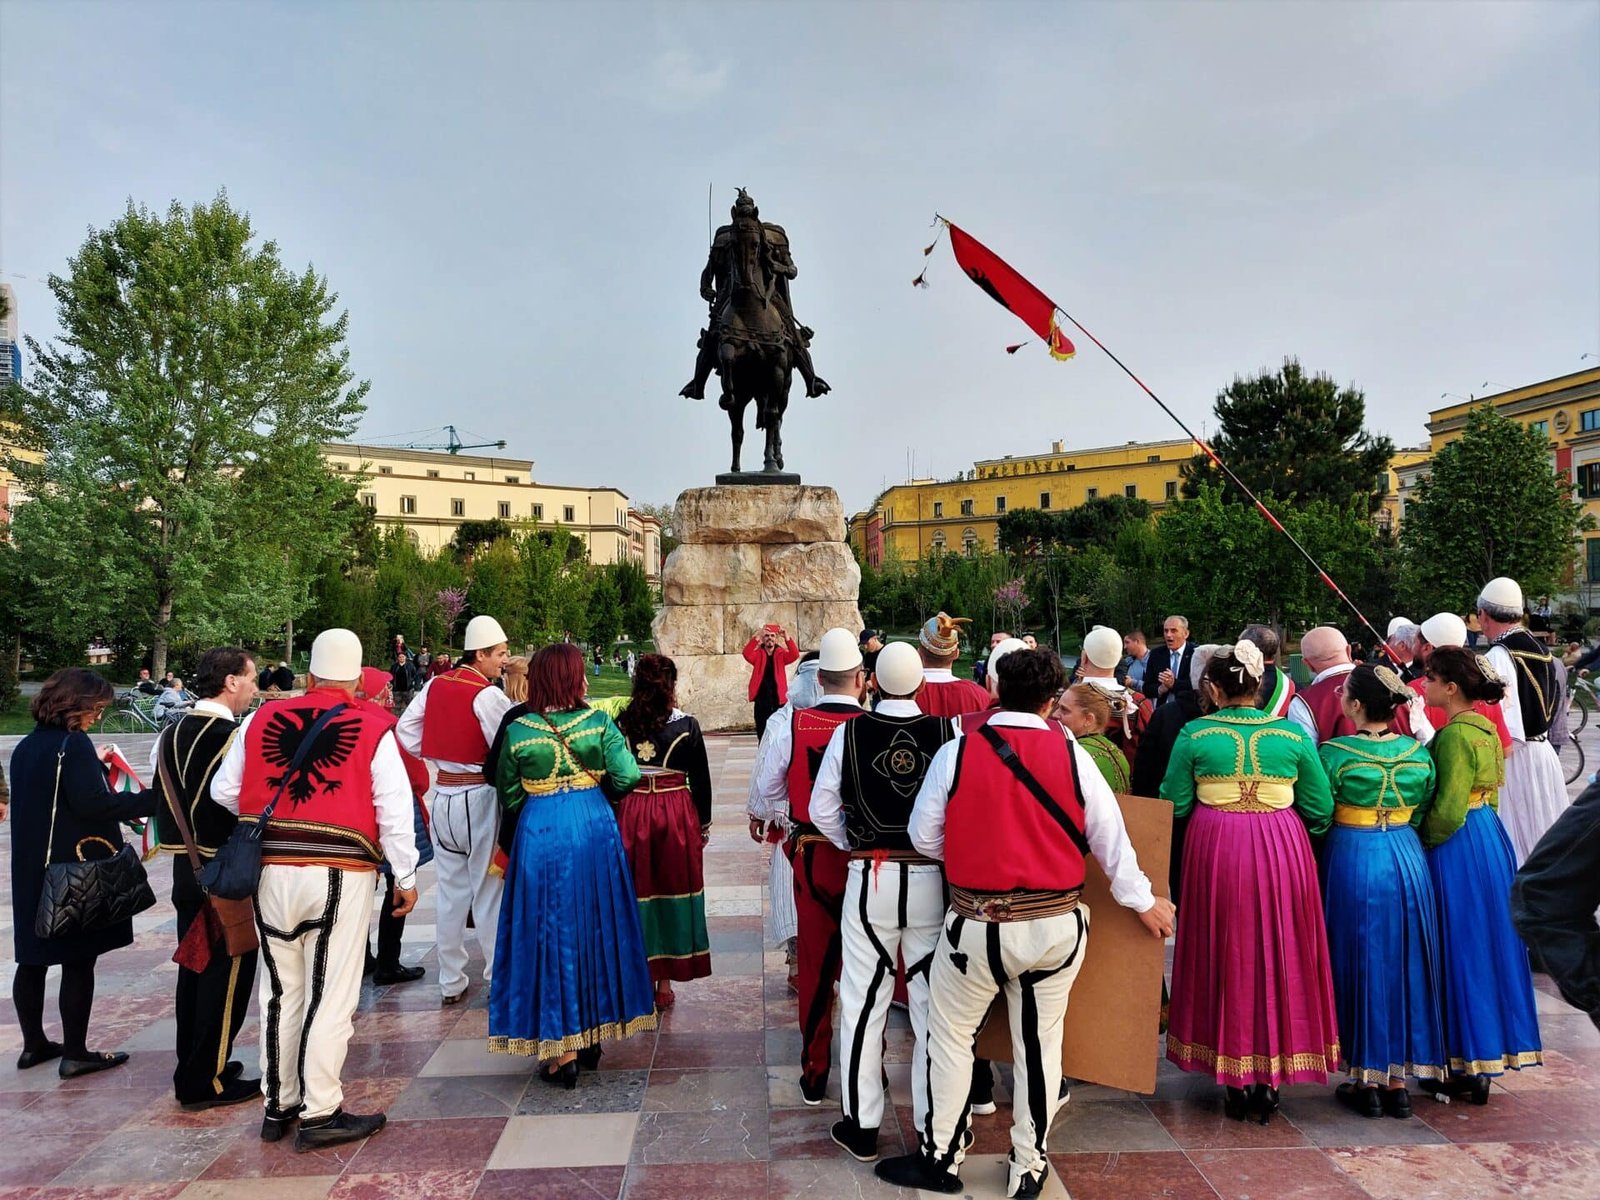 men and women dressed in traditional costumes in front of the Skanderbeg statue in Tirana